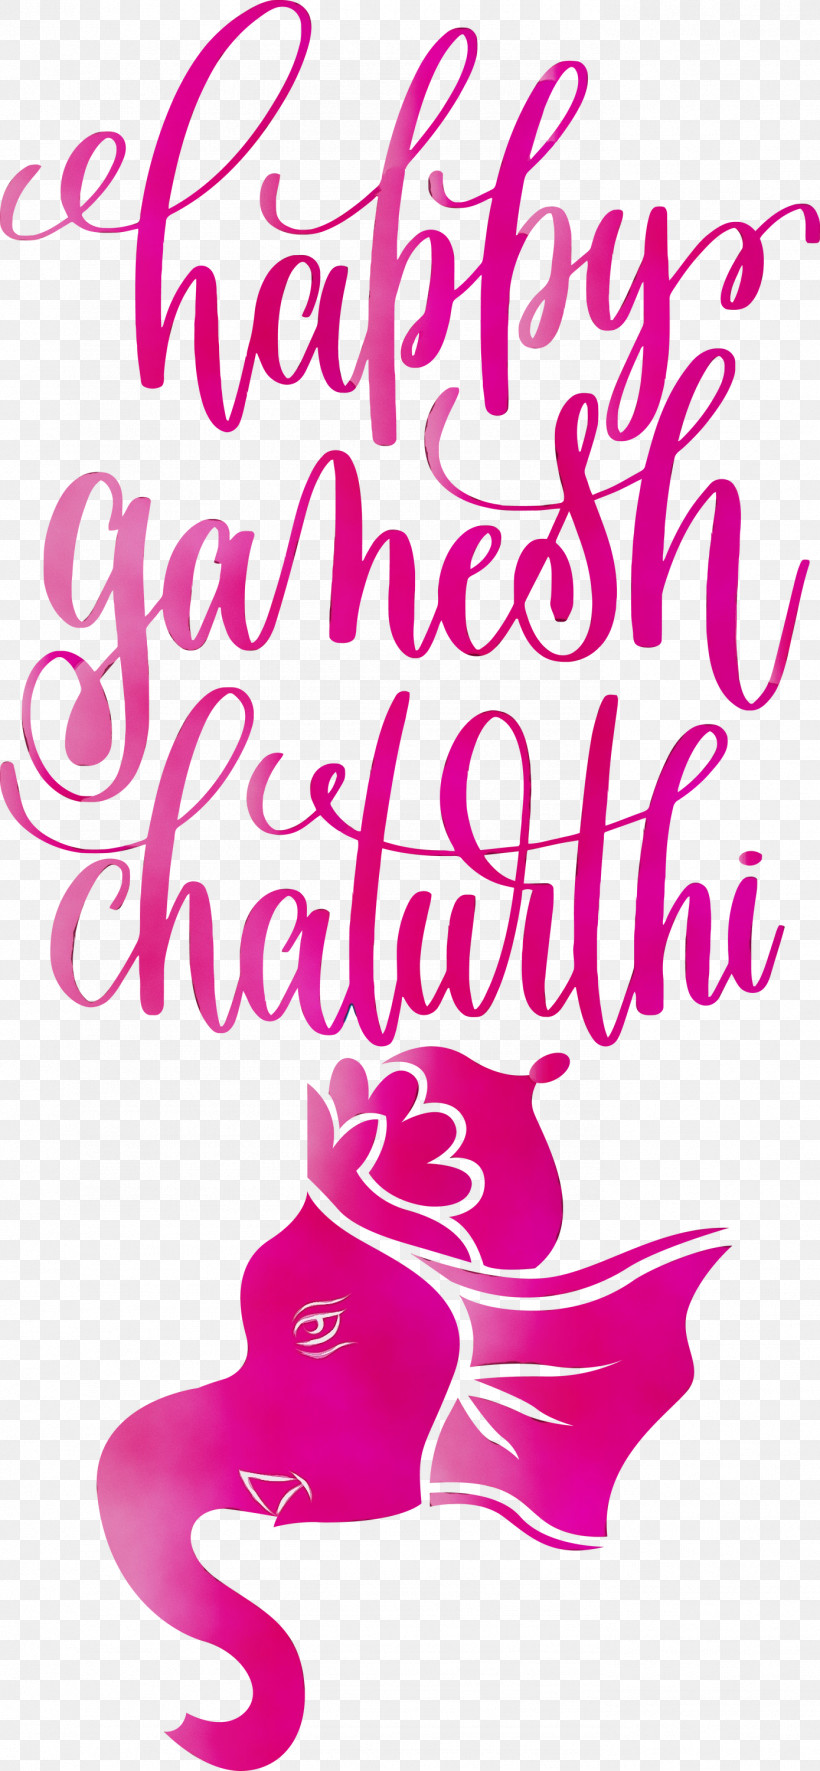 Calligraphy Drawing Lettering Painting Watercolor Painting, PNG, 1389x3000px, Happy Ganesh Chaturthi, Abstract Art, Calligraphy, Creativity, Drawing Download Free